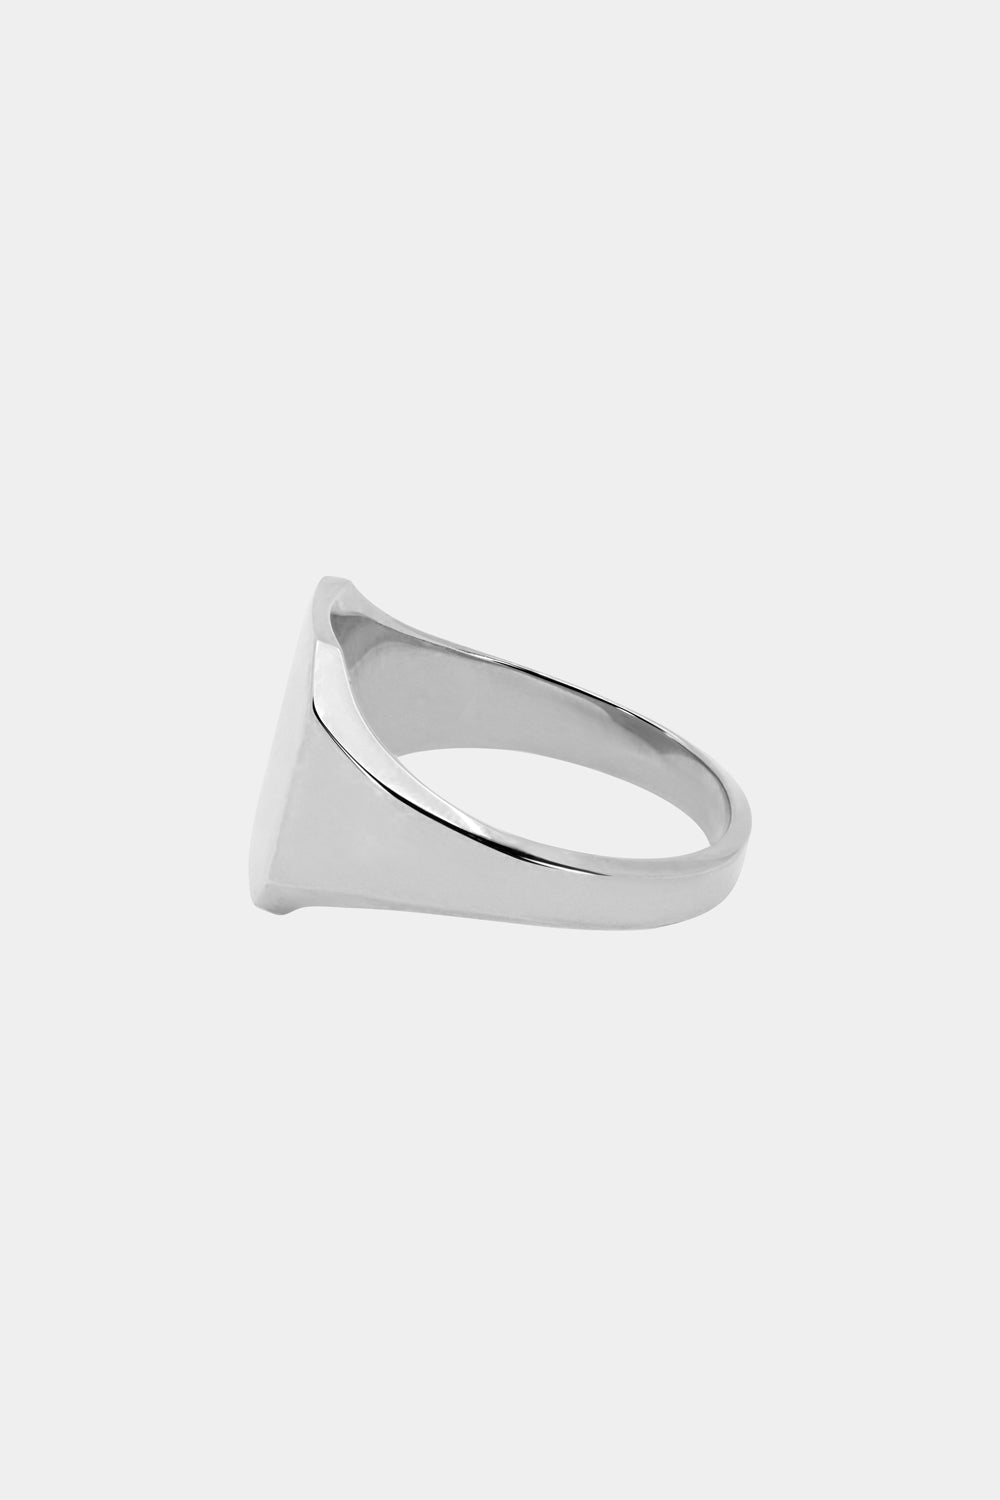 Tallows Signet Ring | Silver or White Gold, More Options Available| Natasha Schweitzer